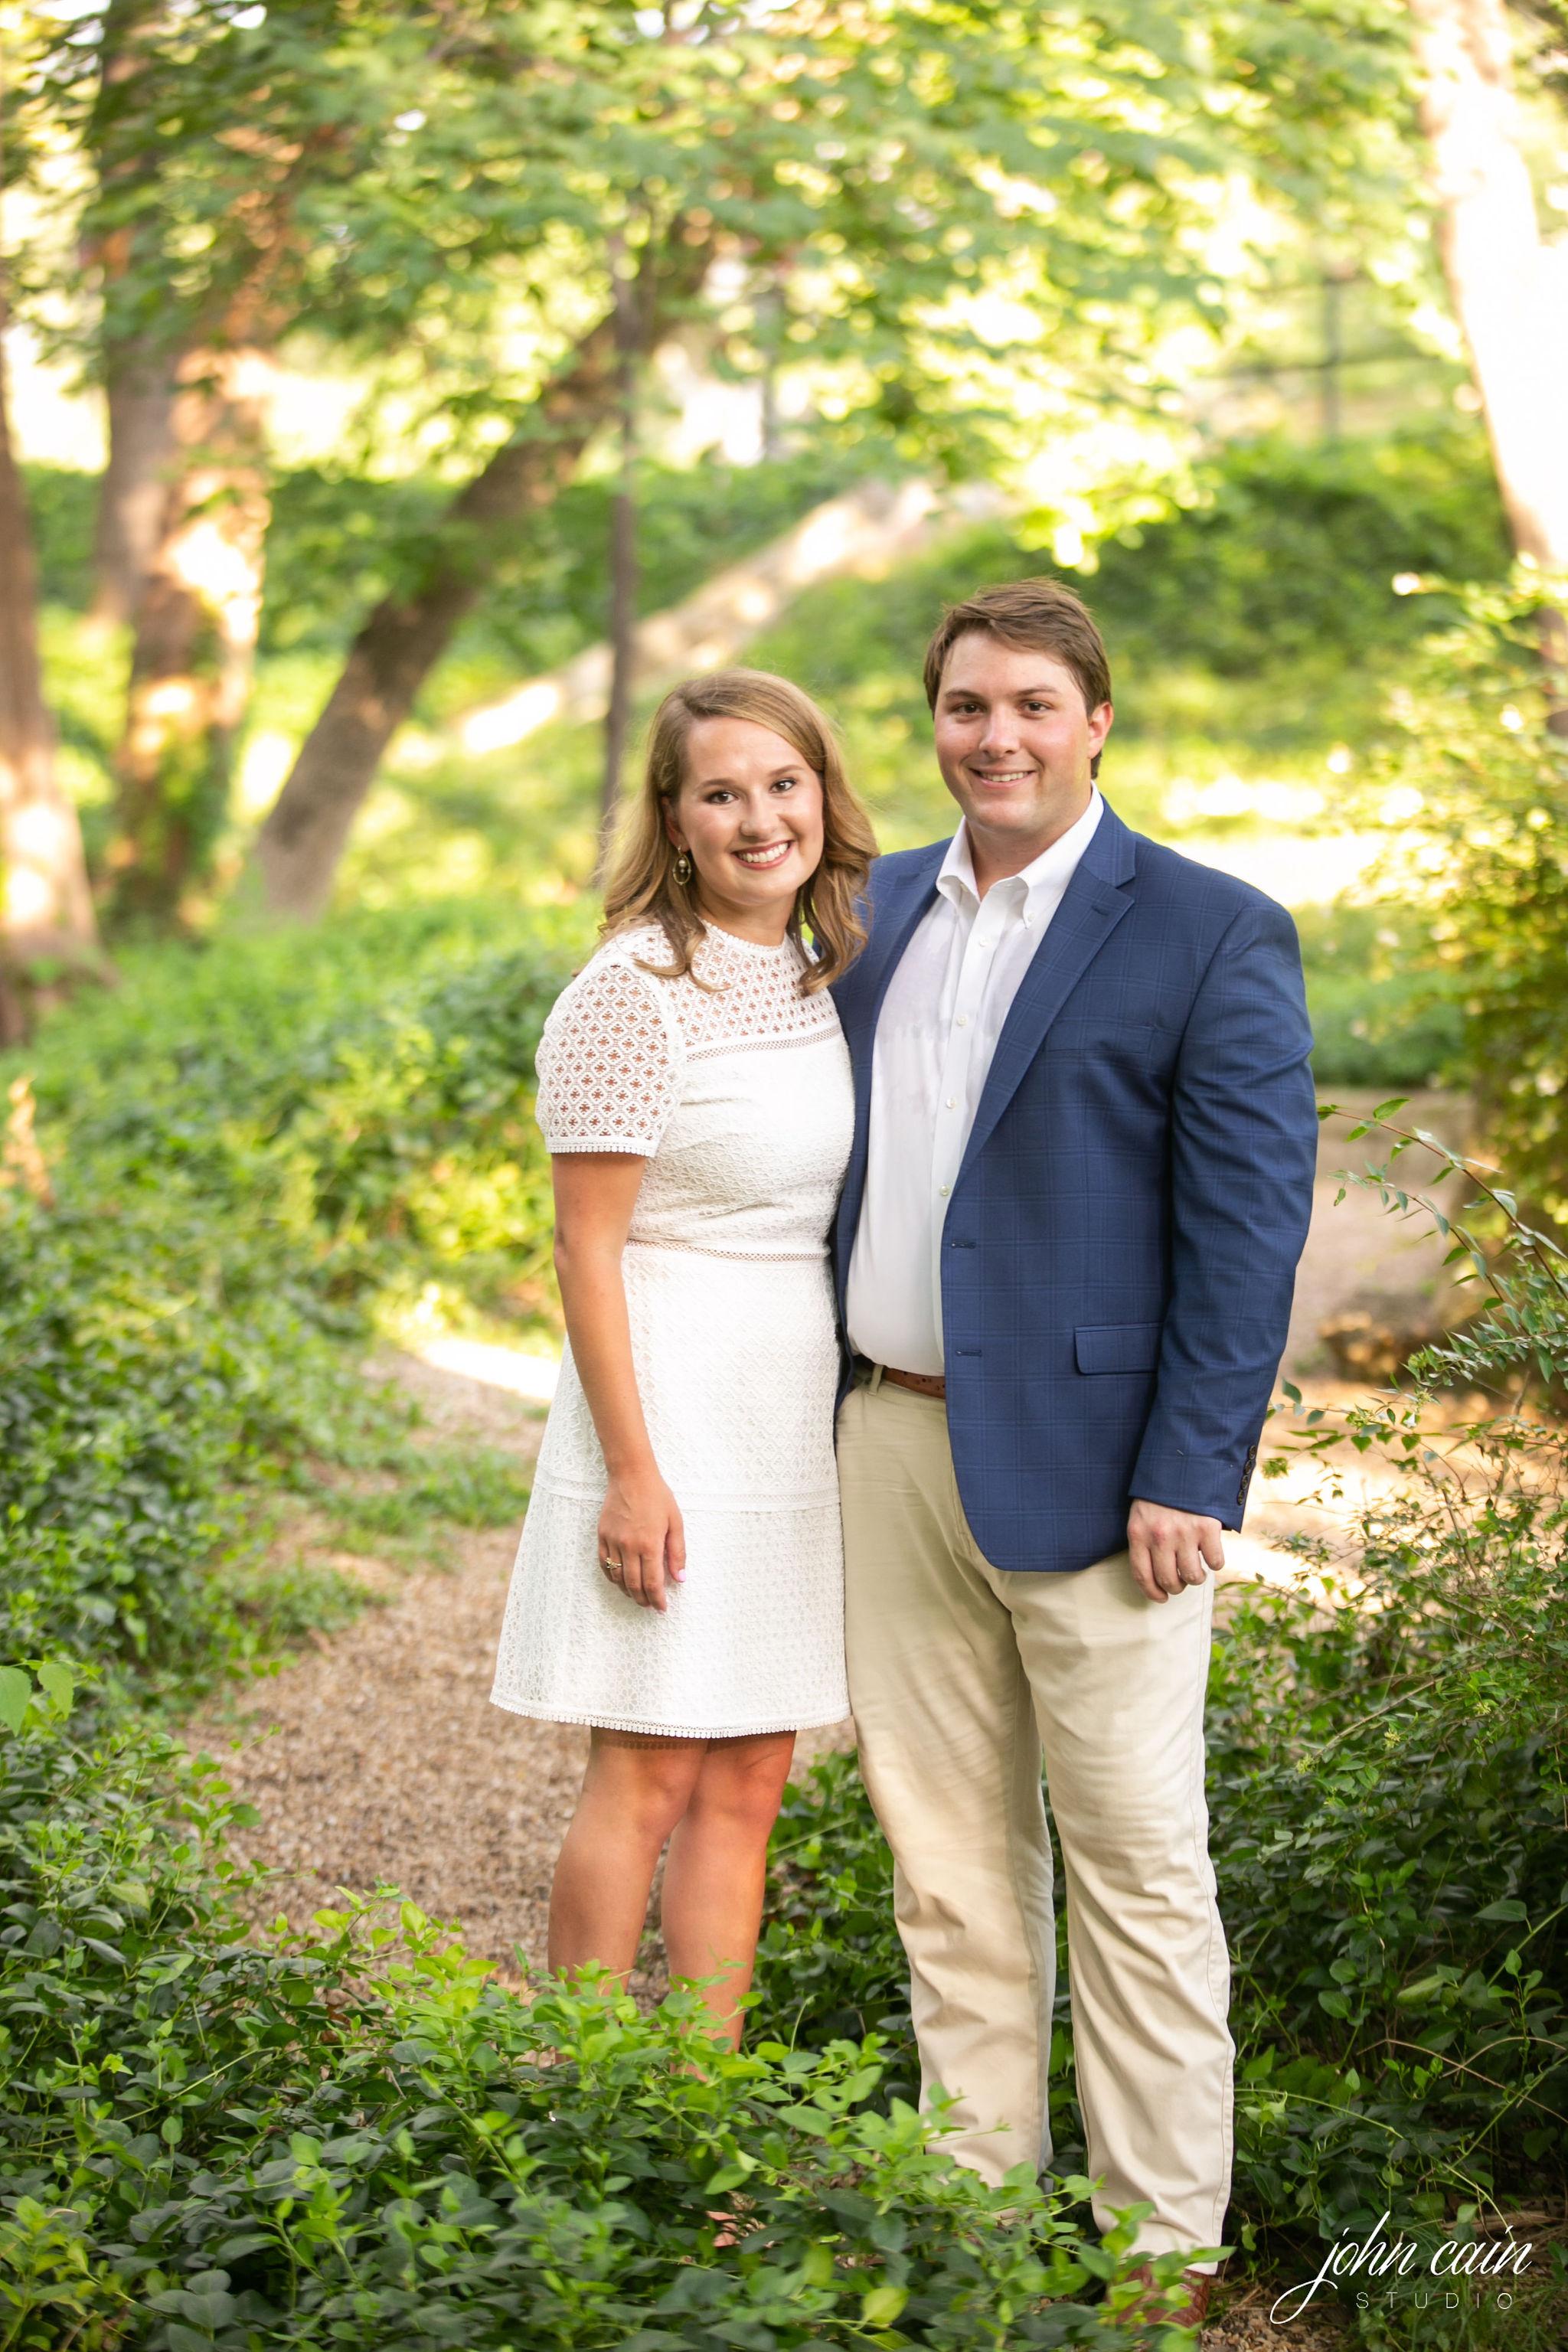 The Wedding Website of Meredith Cozby and Jamie King